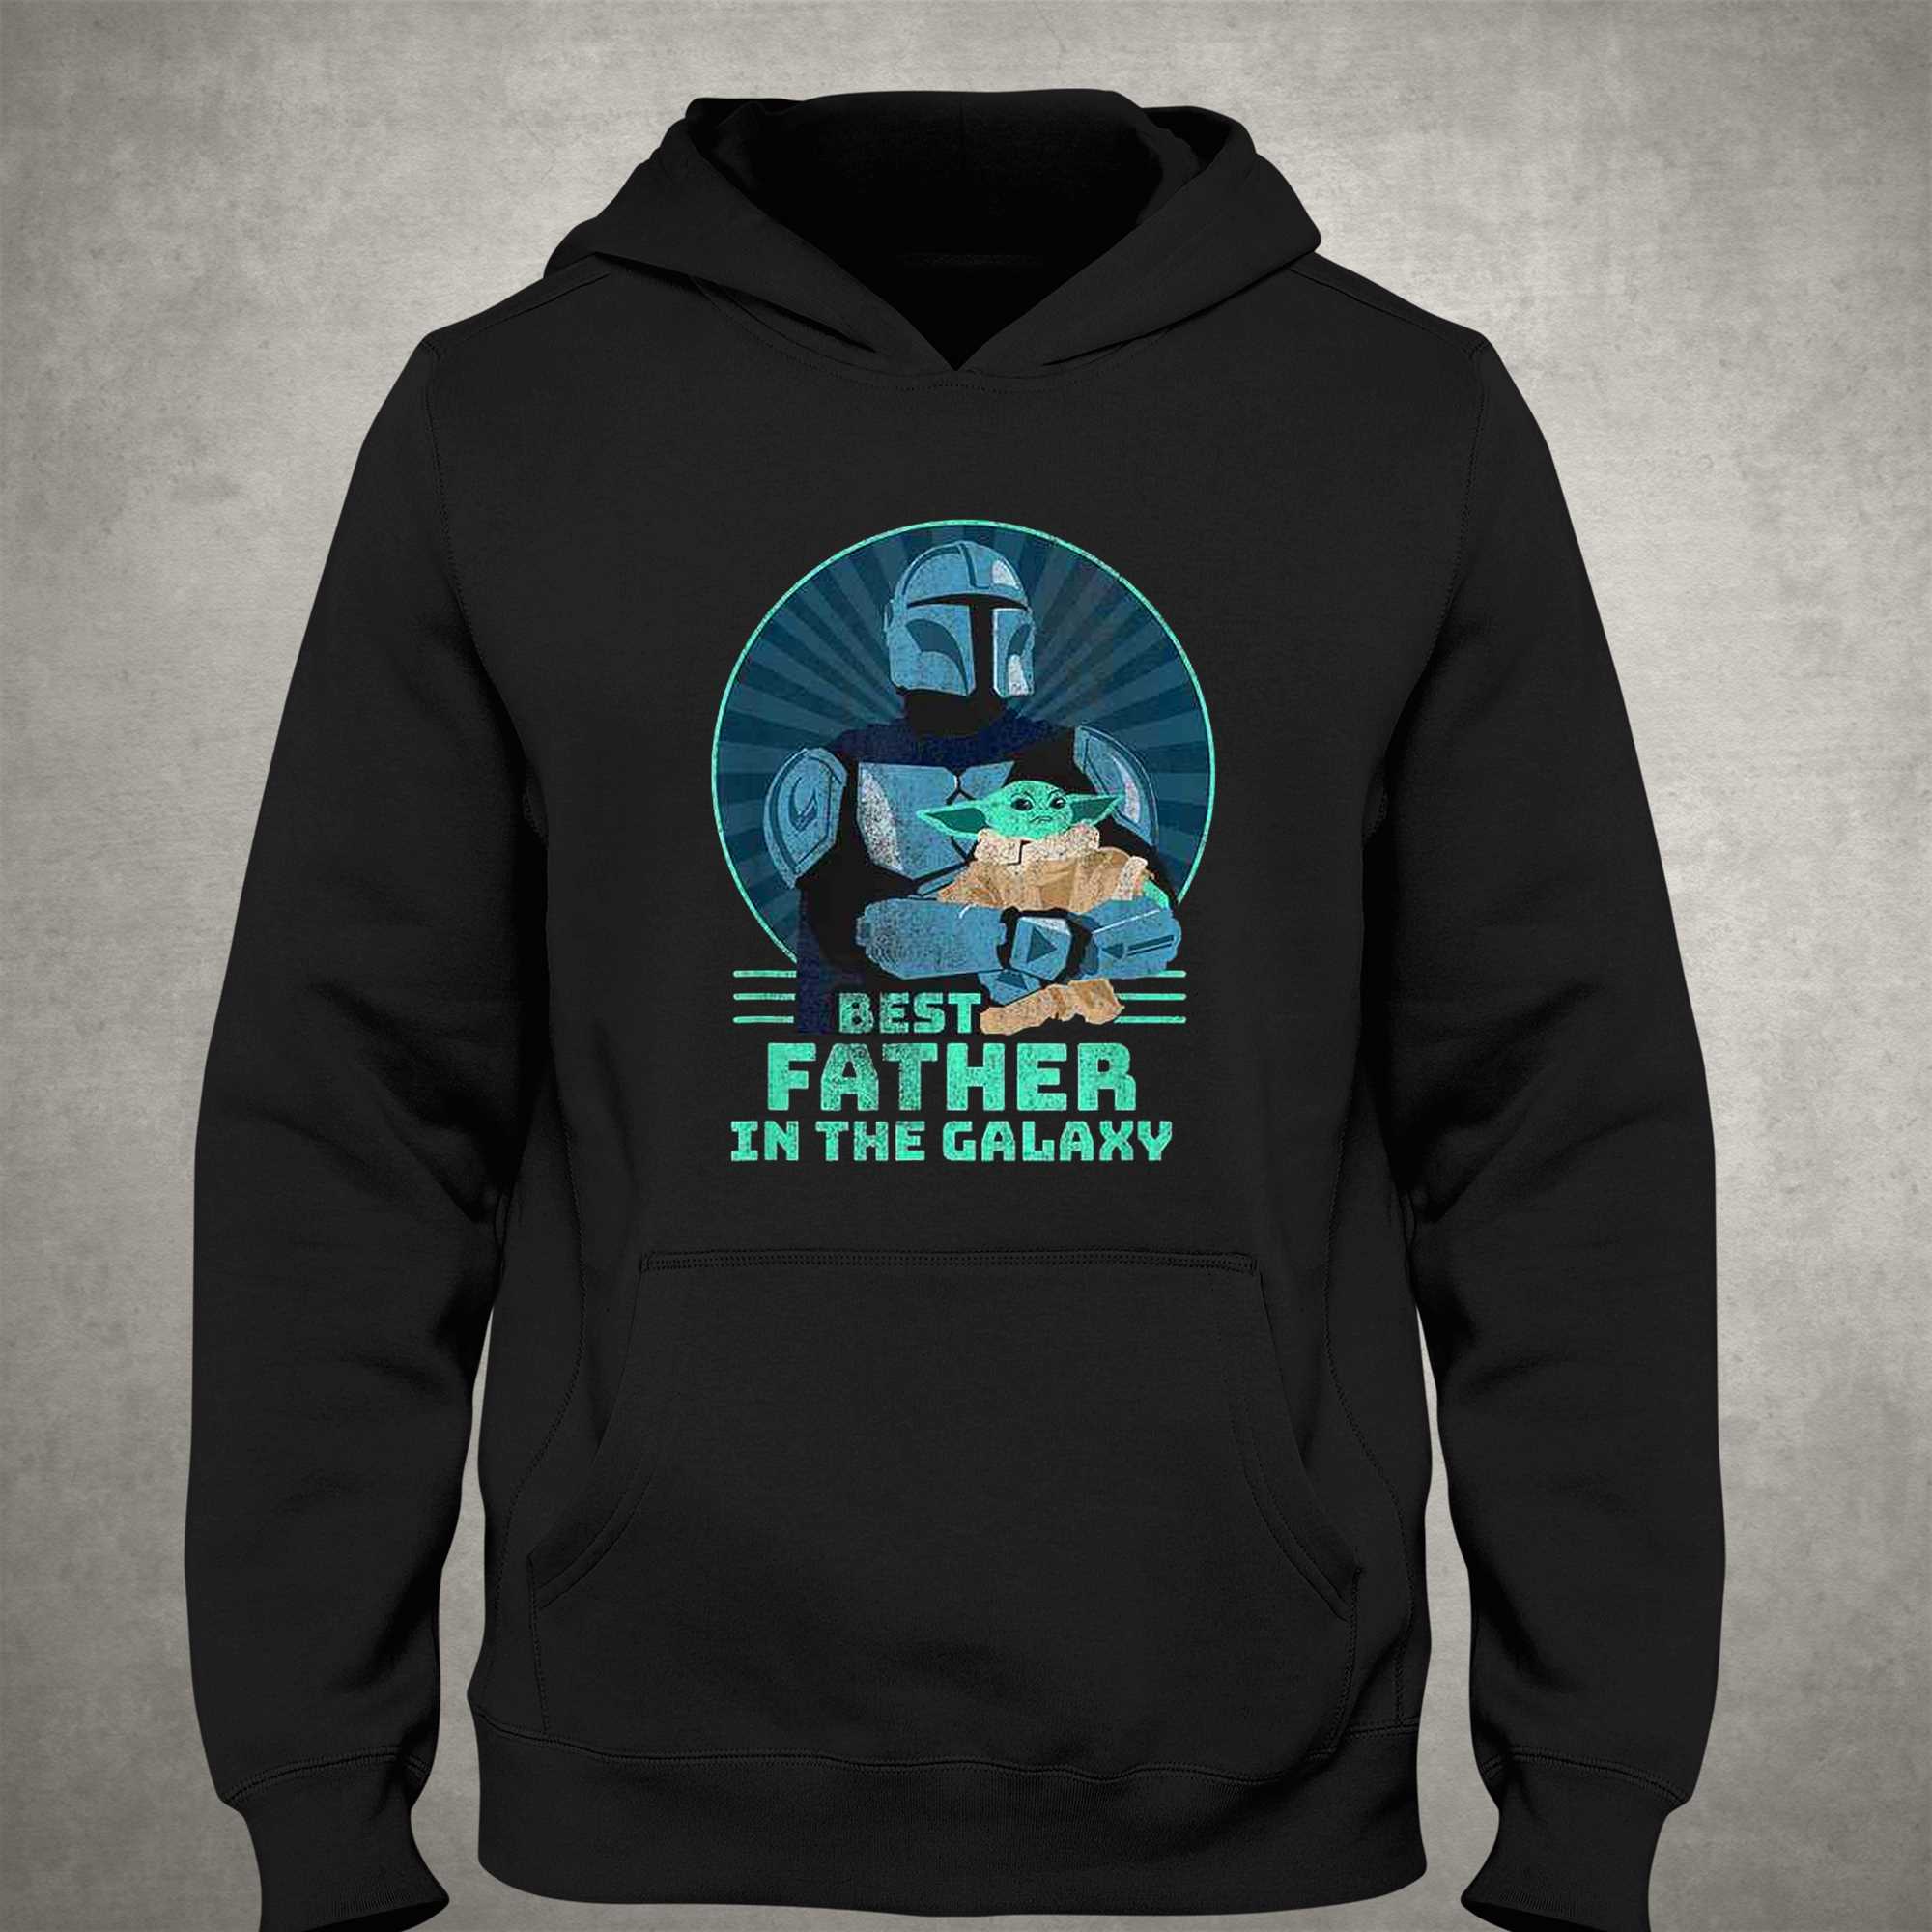 Just a Mom who loves Grogu shirt, hoodie, sweater, long sleeve and tank top